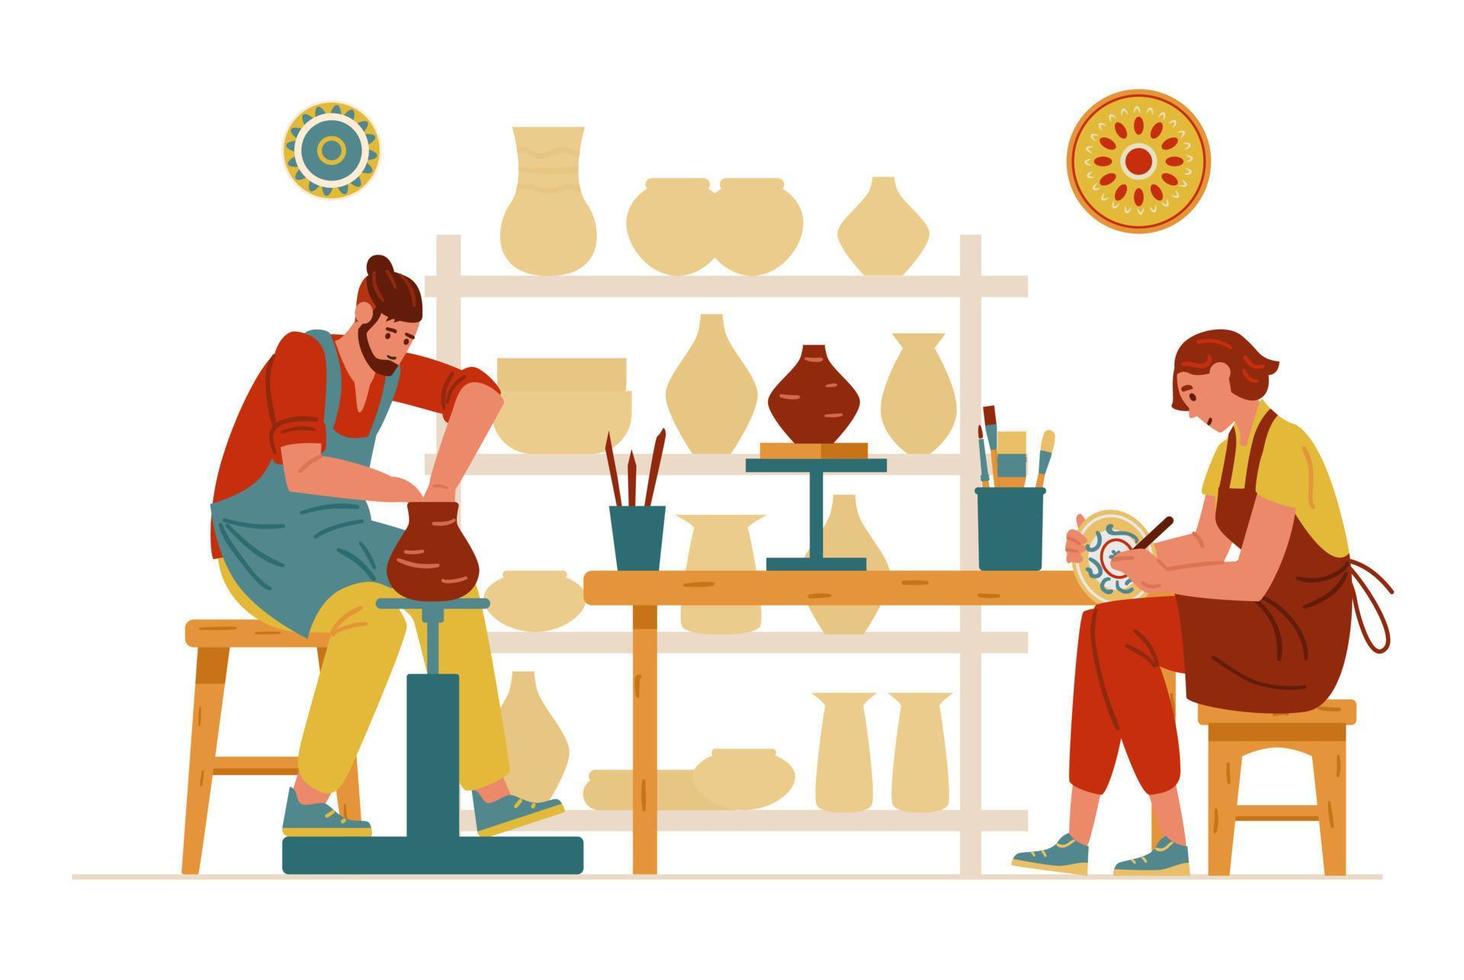 Pottery Studio Interior With Ceramics And People Working. Man Making Clay Pot, Woman Painting A Dish. Vector Illustration.